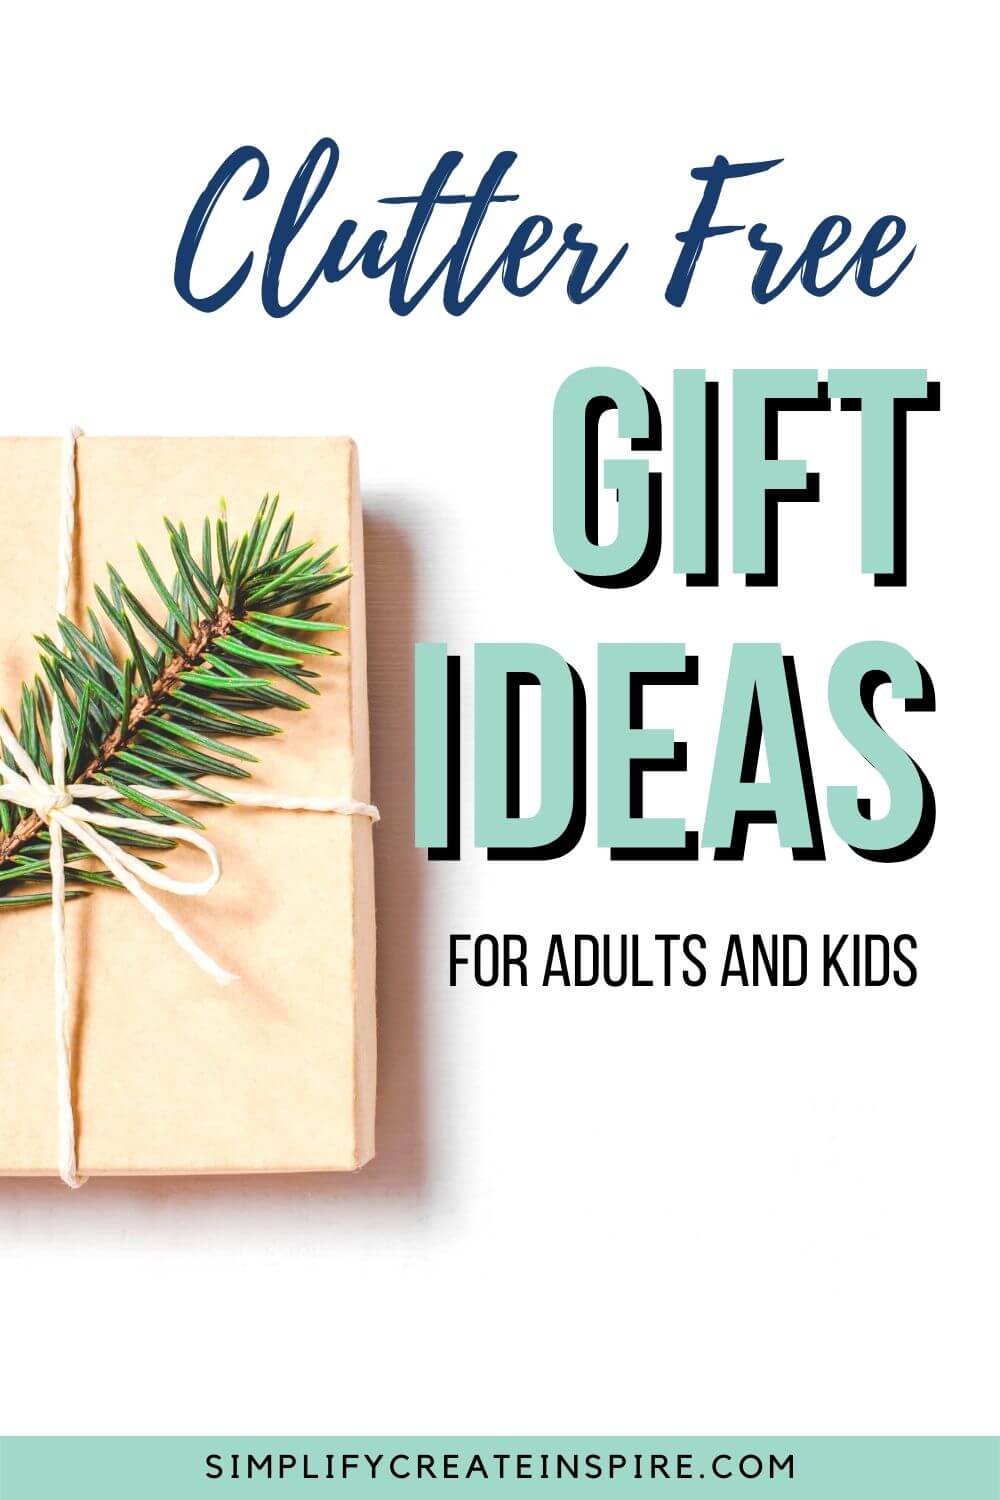 clutter-free gift ideas